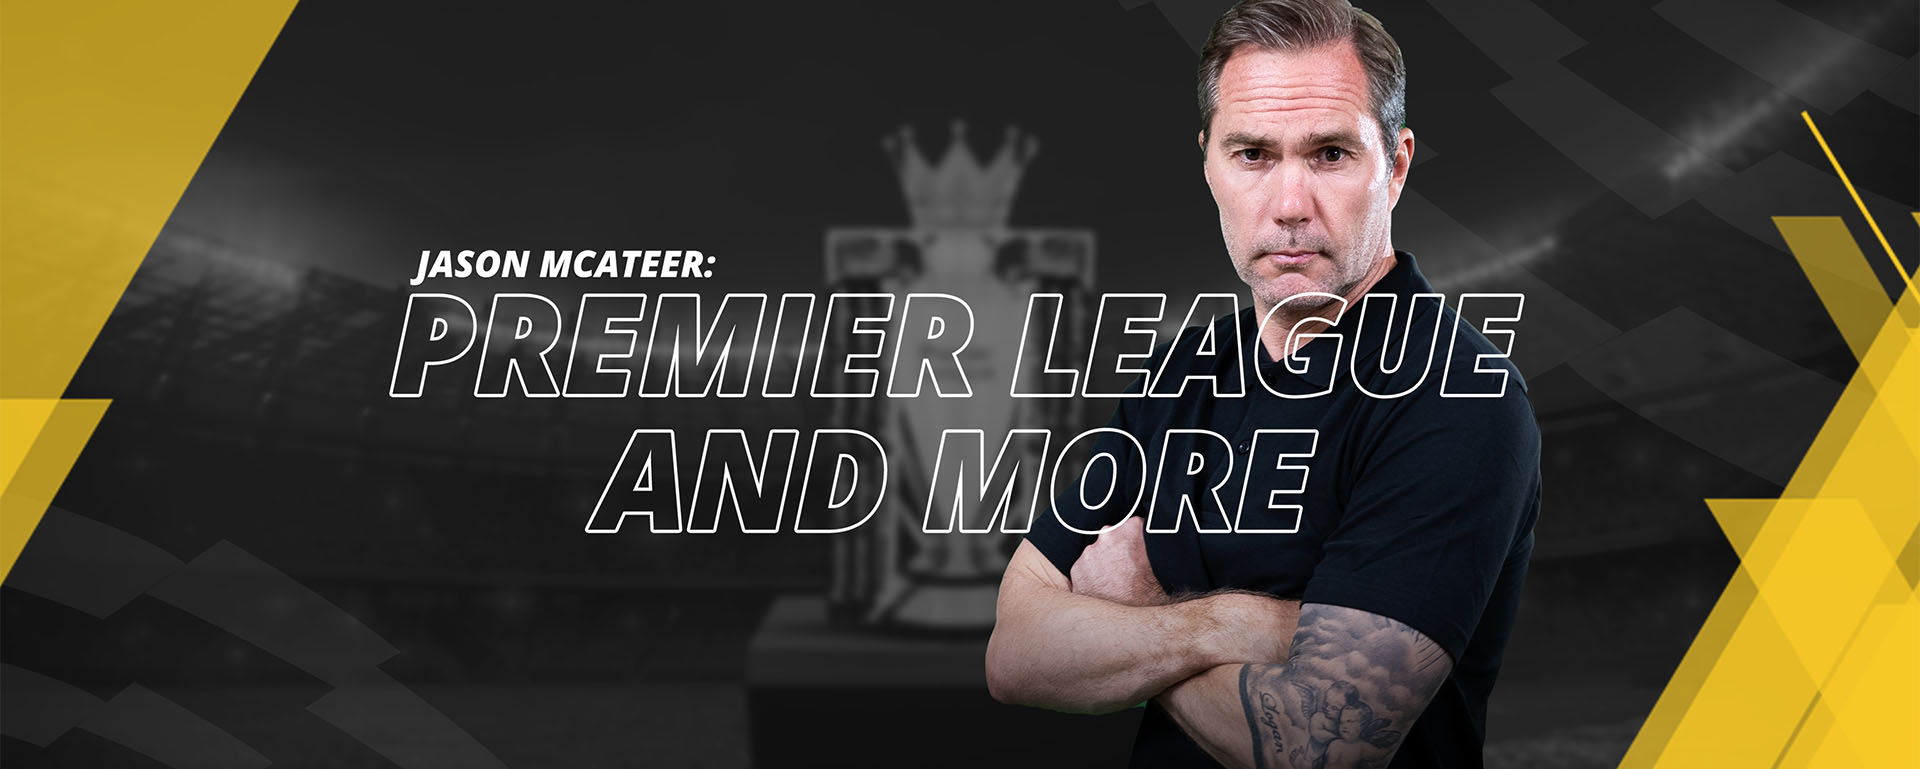 JASON MCATEER PREMIER LEAGUE ROUND UP AND MORE